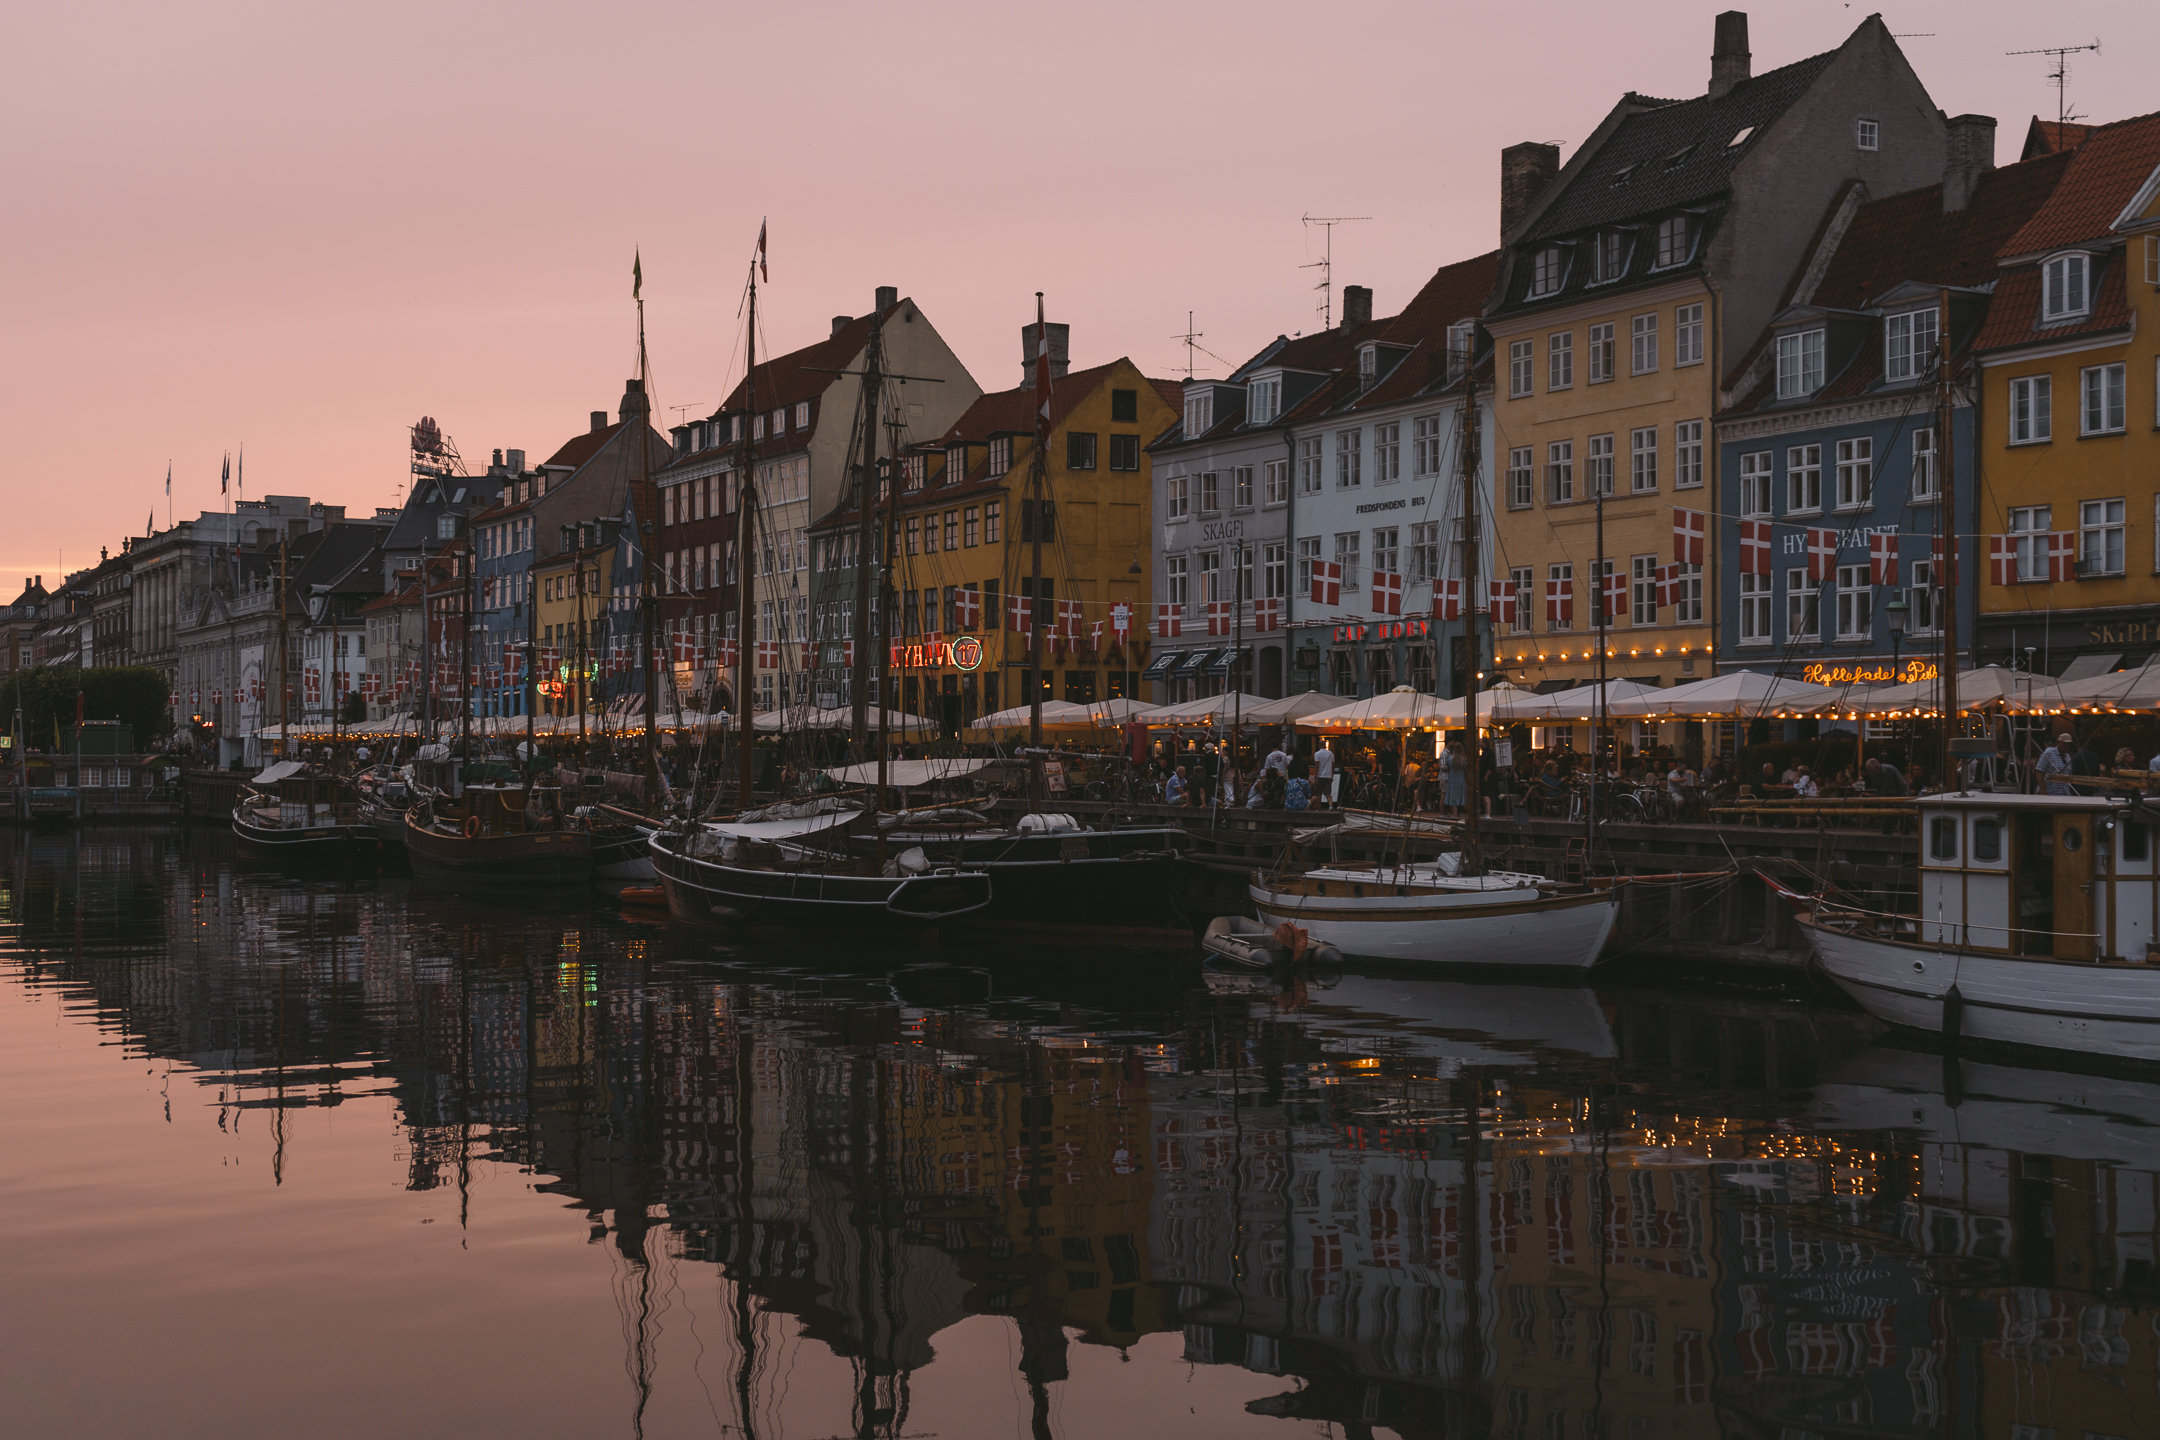 A guide to Denmark's capital city